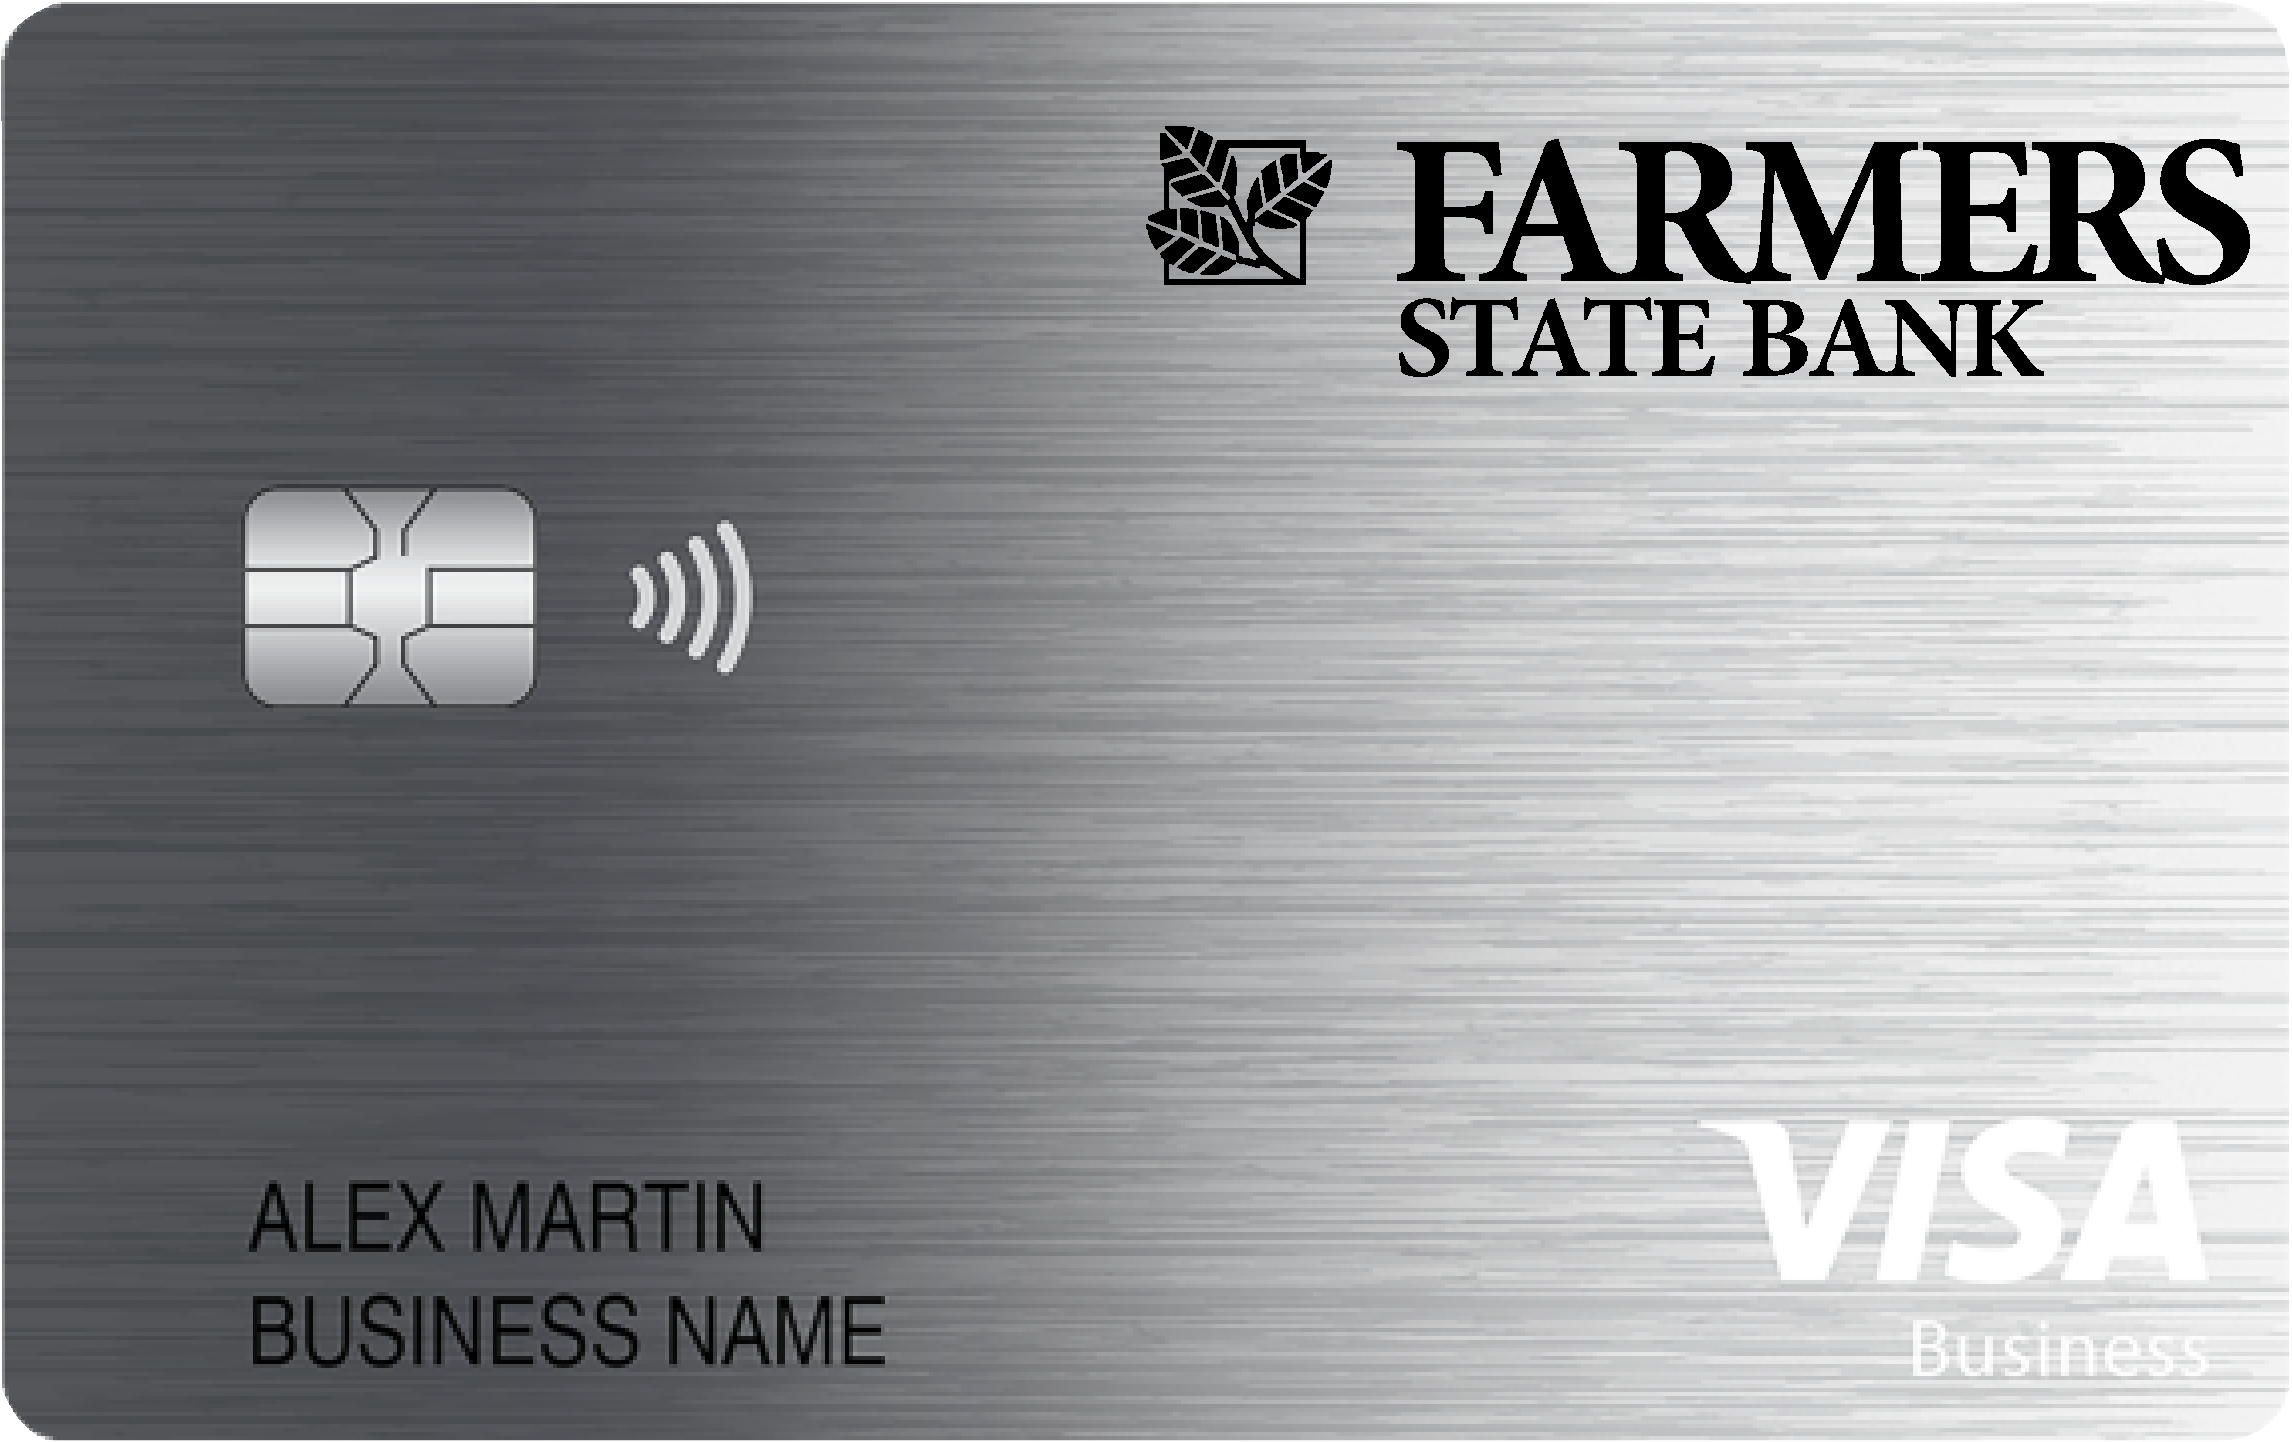 Farmers State Bank of Alto Pass Business Cash Preferred